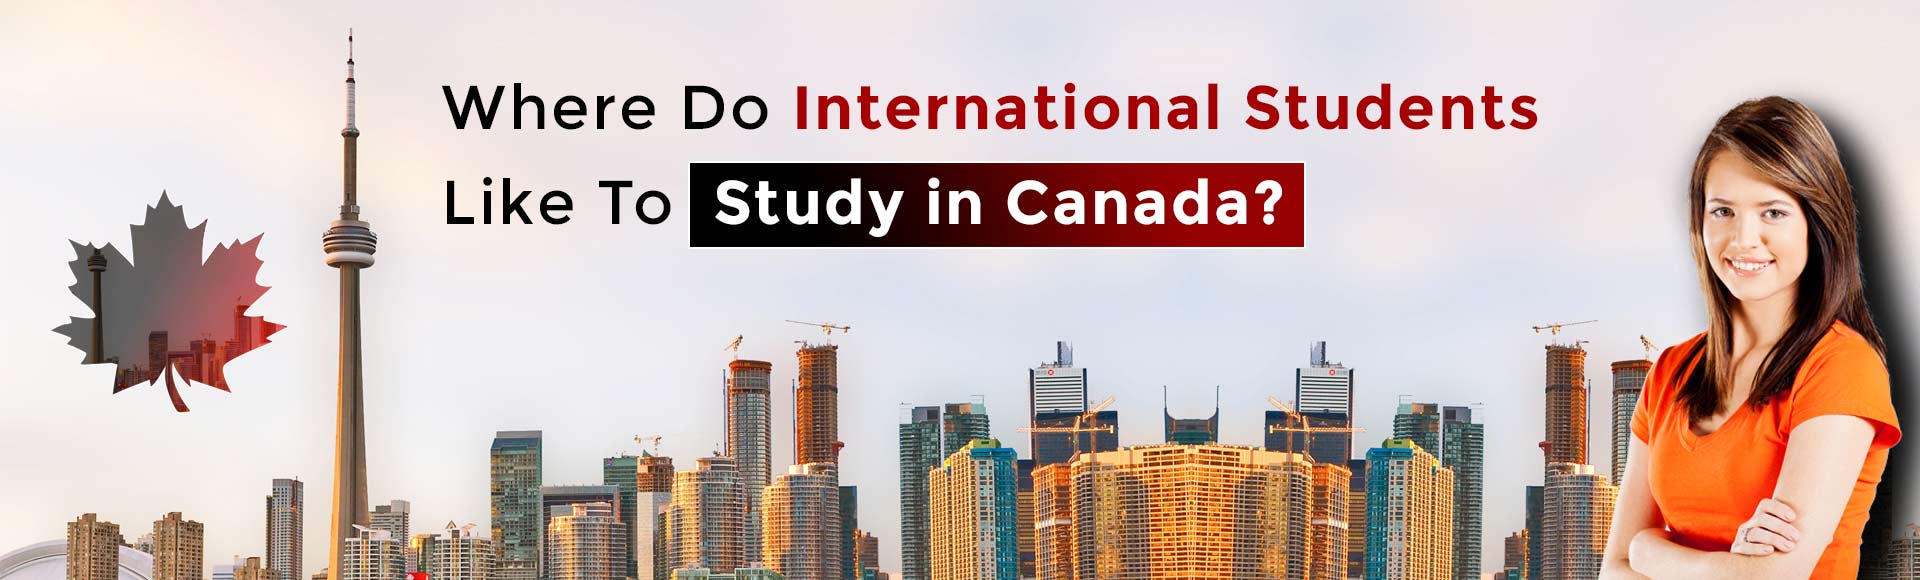 Where do international students like to study in Canada?